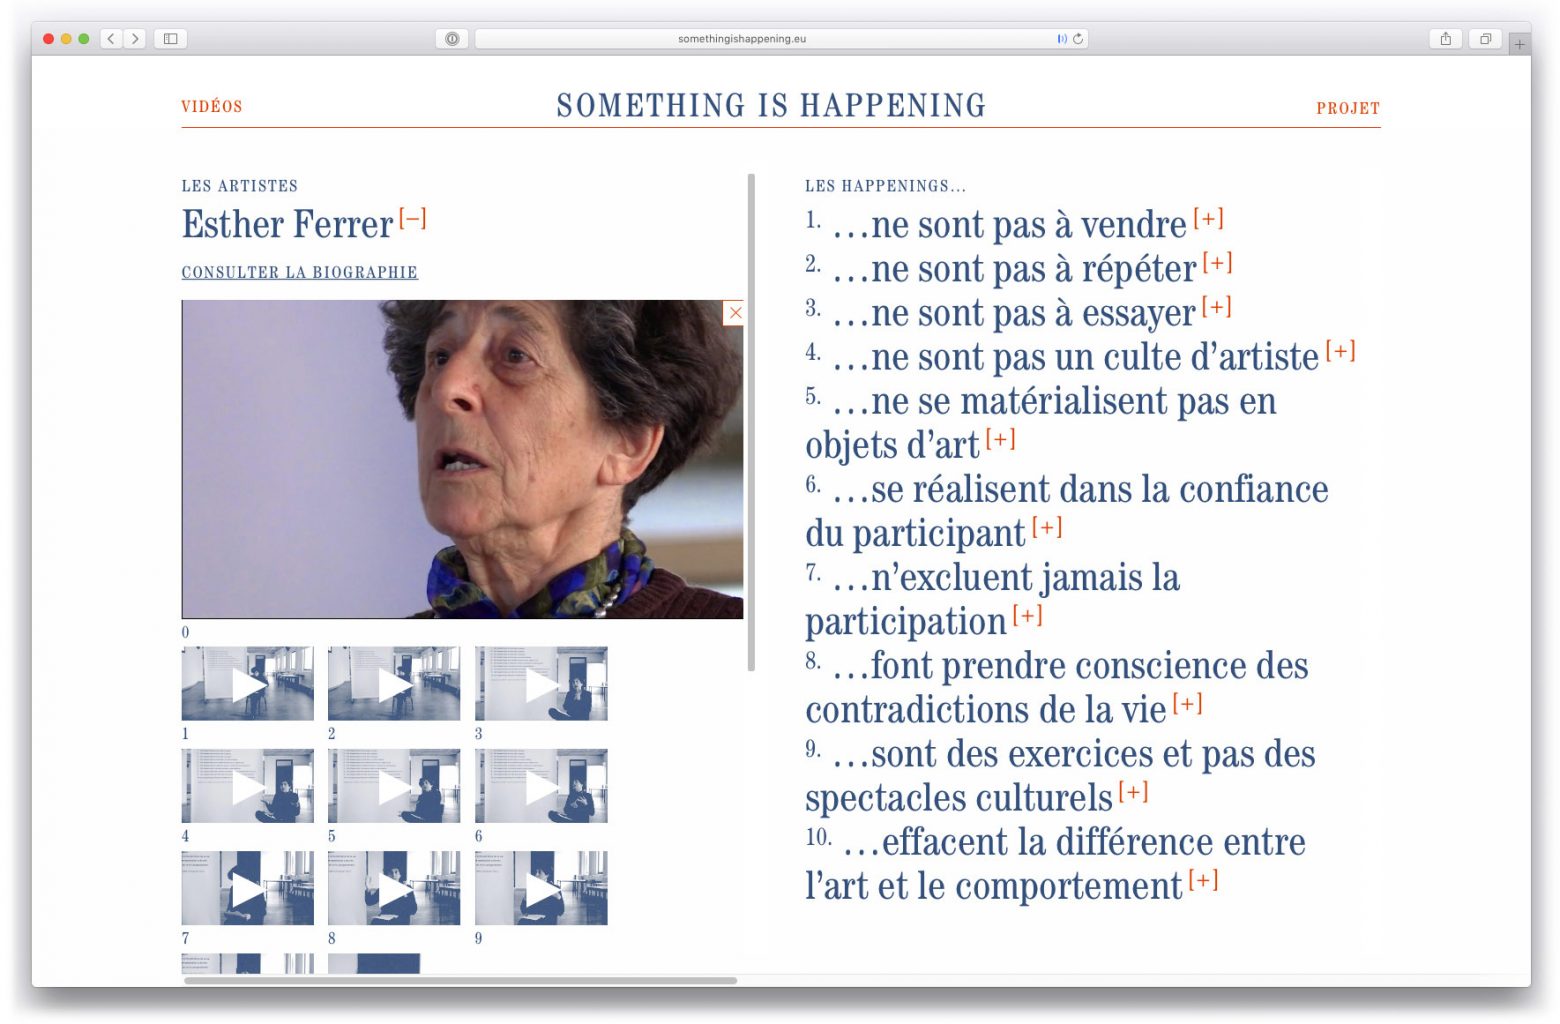 Interactive plateforme for research project Something is Happening, hosting 100 vidéos from dancers, artists and performers, organised by the École Nationale Supérieure d’Arts Paris - Cergy and the CND, Centre National de la Danse, designed by In the shade of a tree studio, founded by Sophie Demay and Maël Fournier Comte.